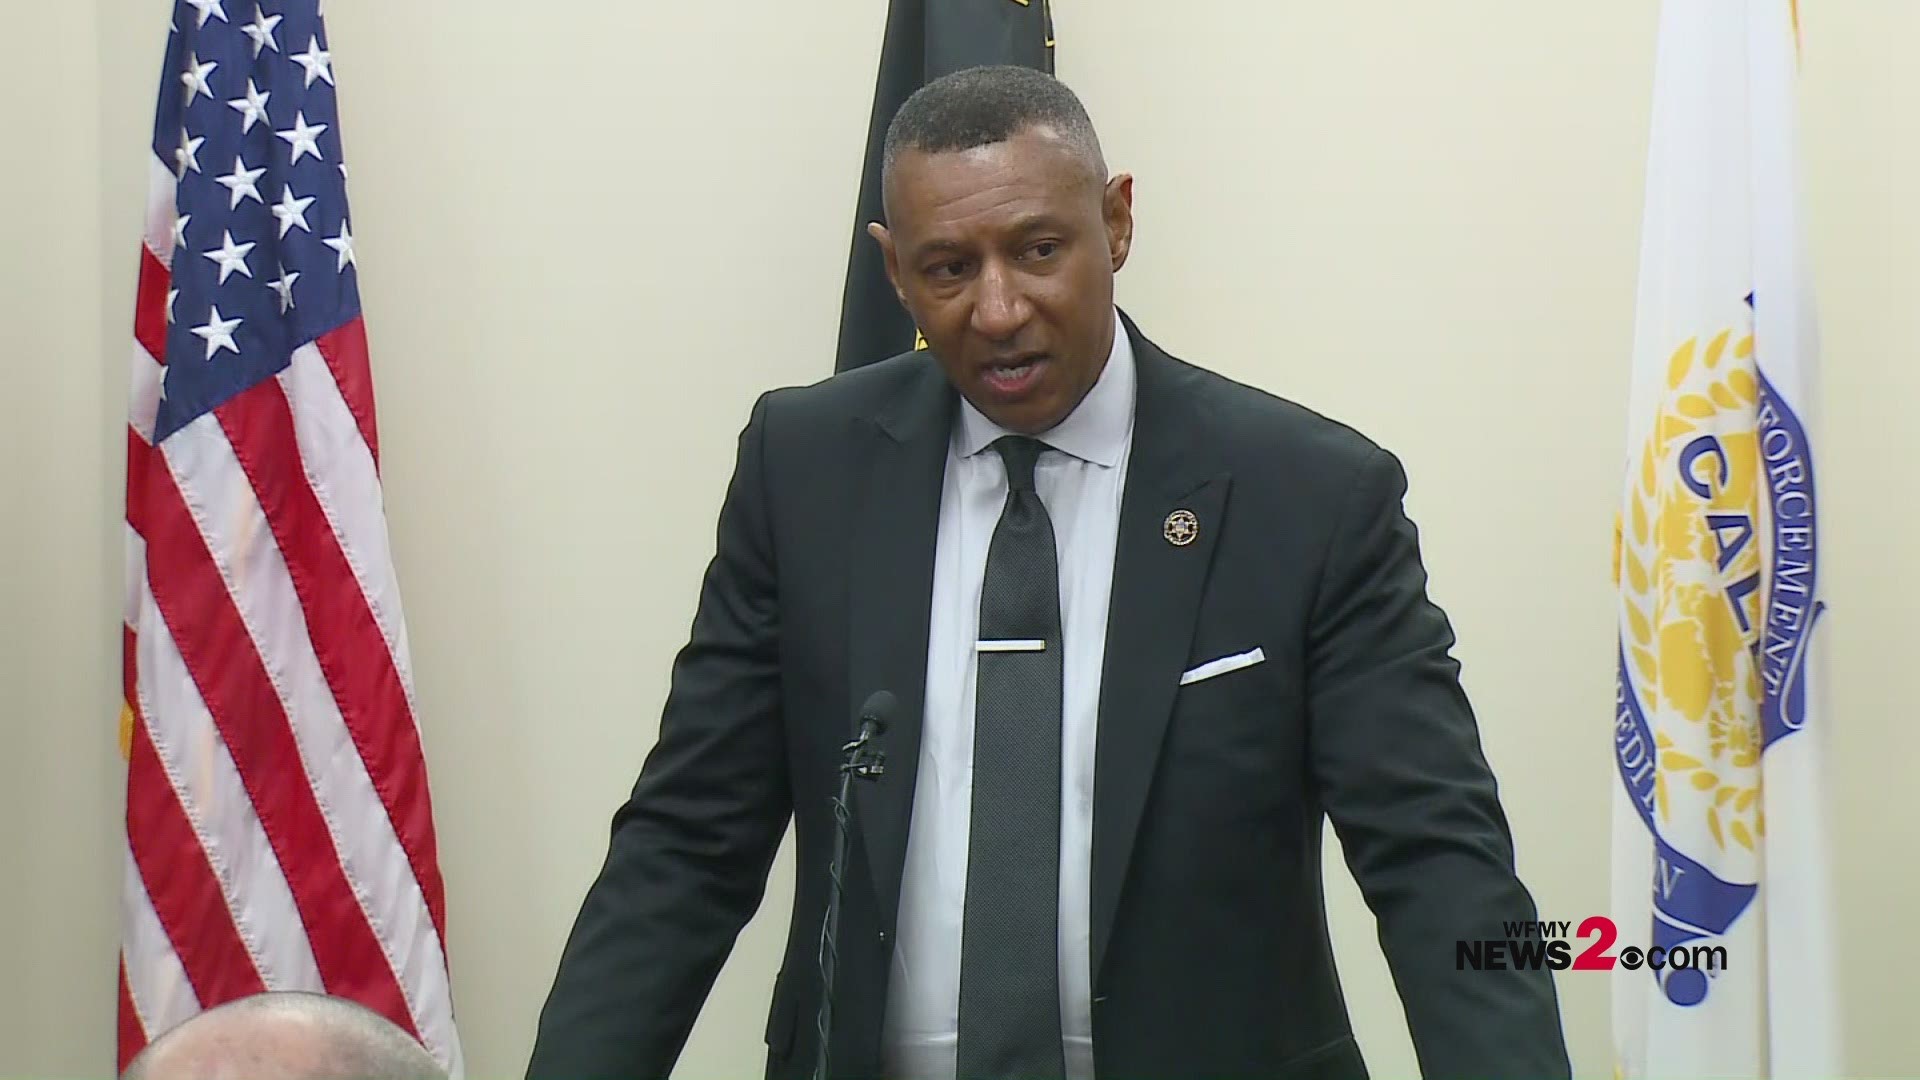 Sheriff Bobby Kimbrough says he is working with the Attorney General and the Governor’s office in order to coordinate the suspension.